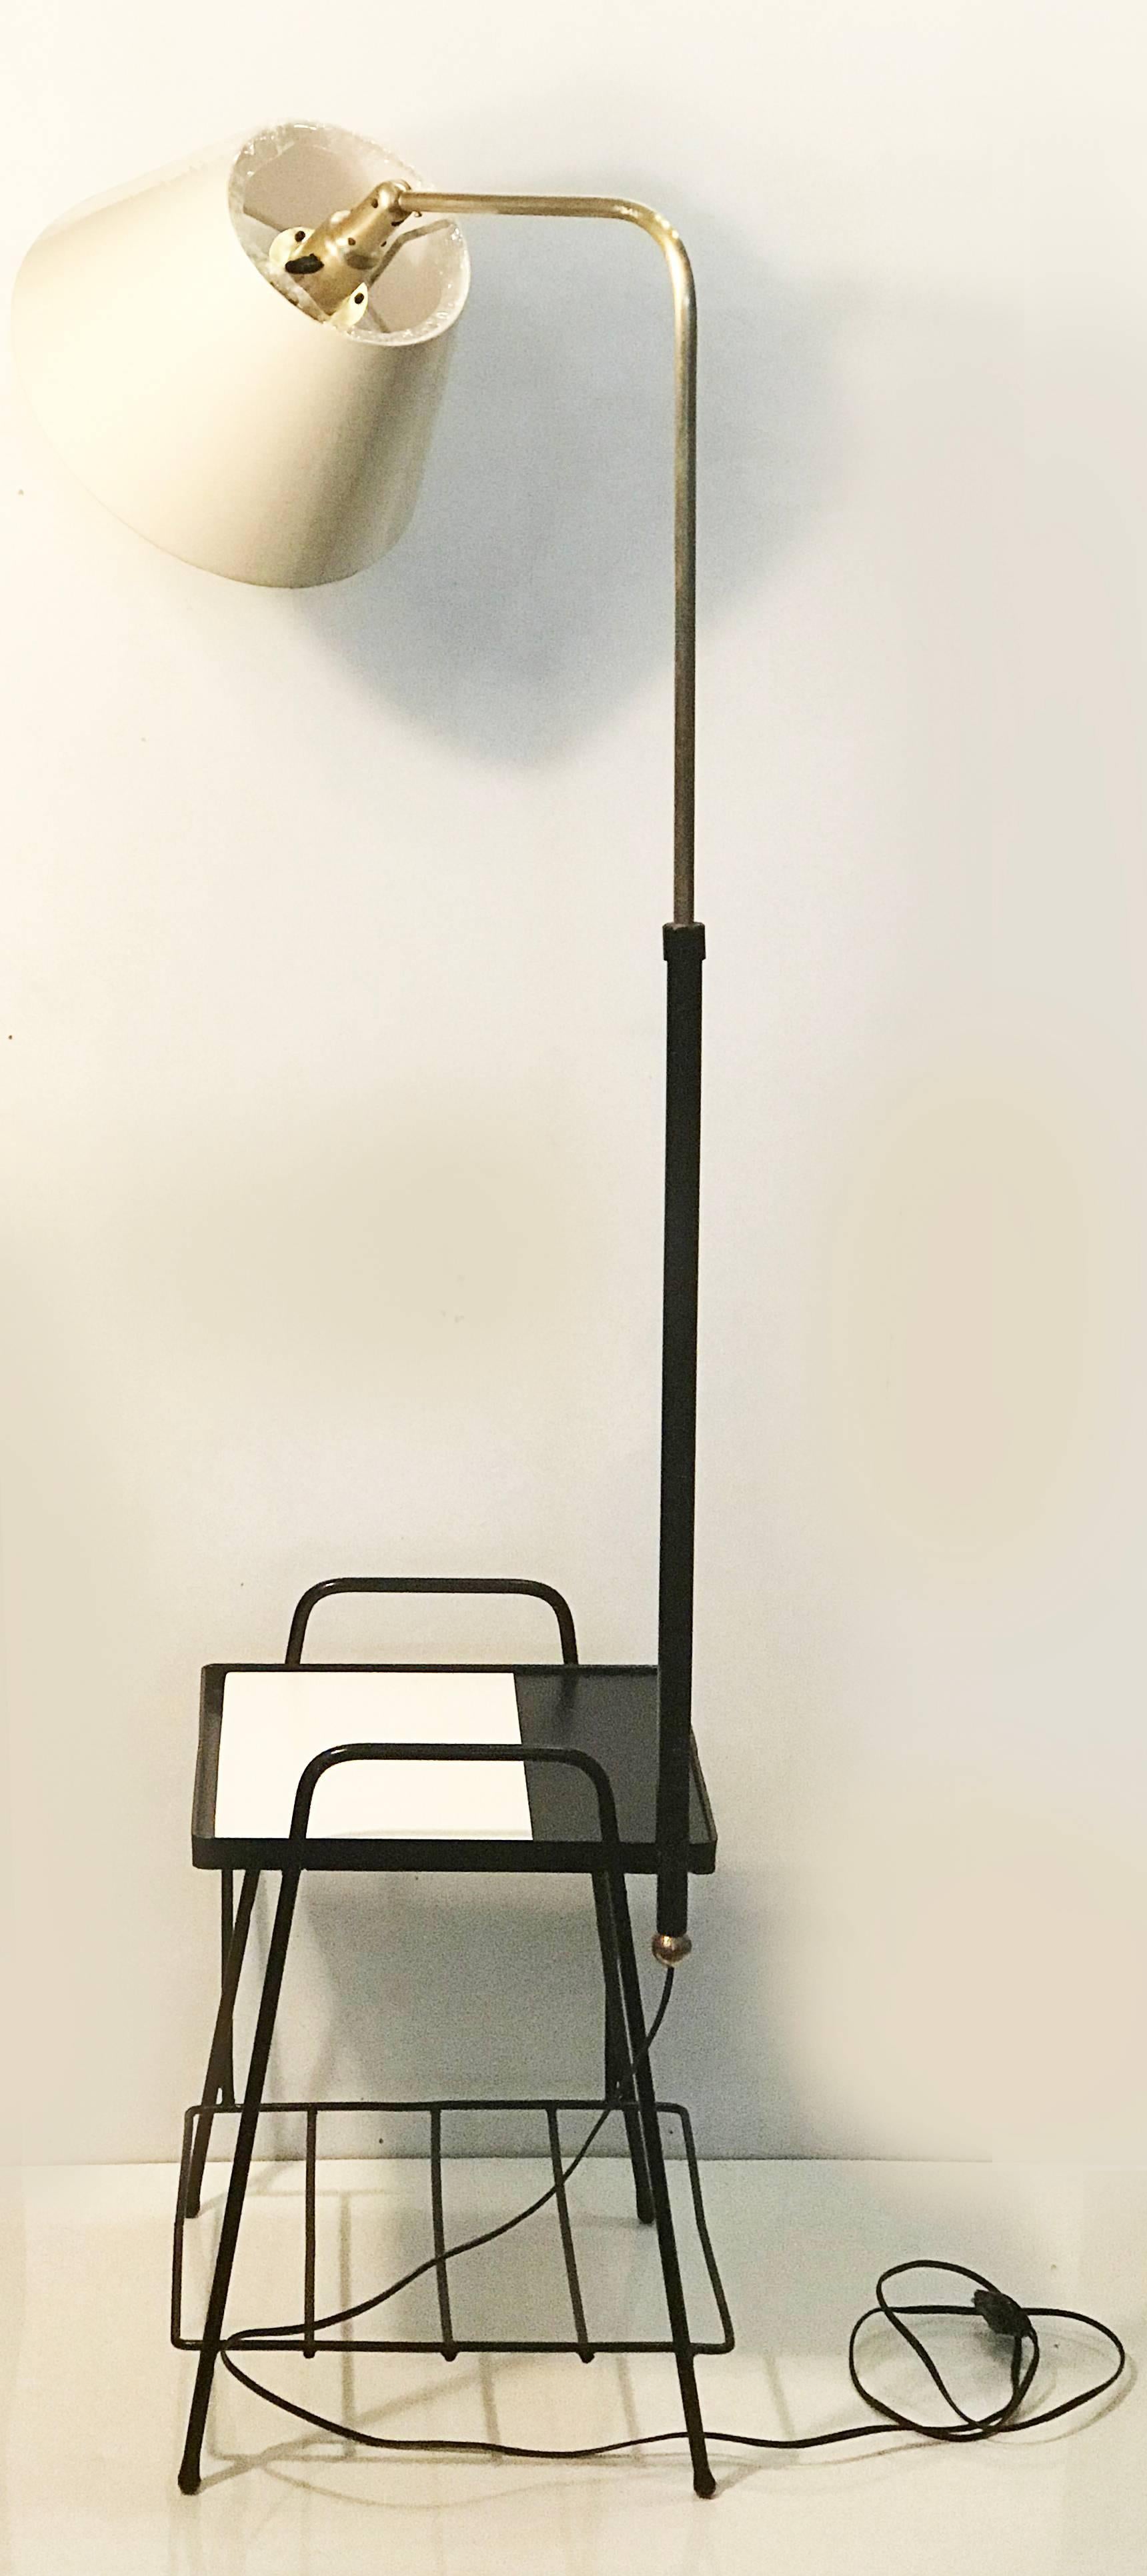 This floor lamp features a square table (31 cm x 31 cm), a magazine rak and a shelve under the table, it has four iron legs ending in little round balls. The central arm that holds the shade, is extensible and made of brass, this arm also rotates